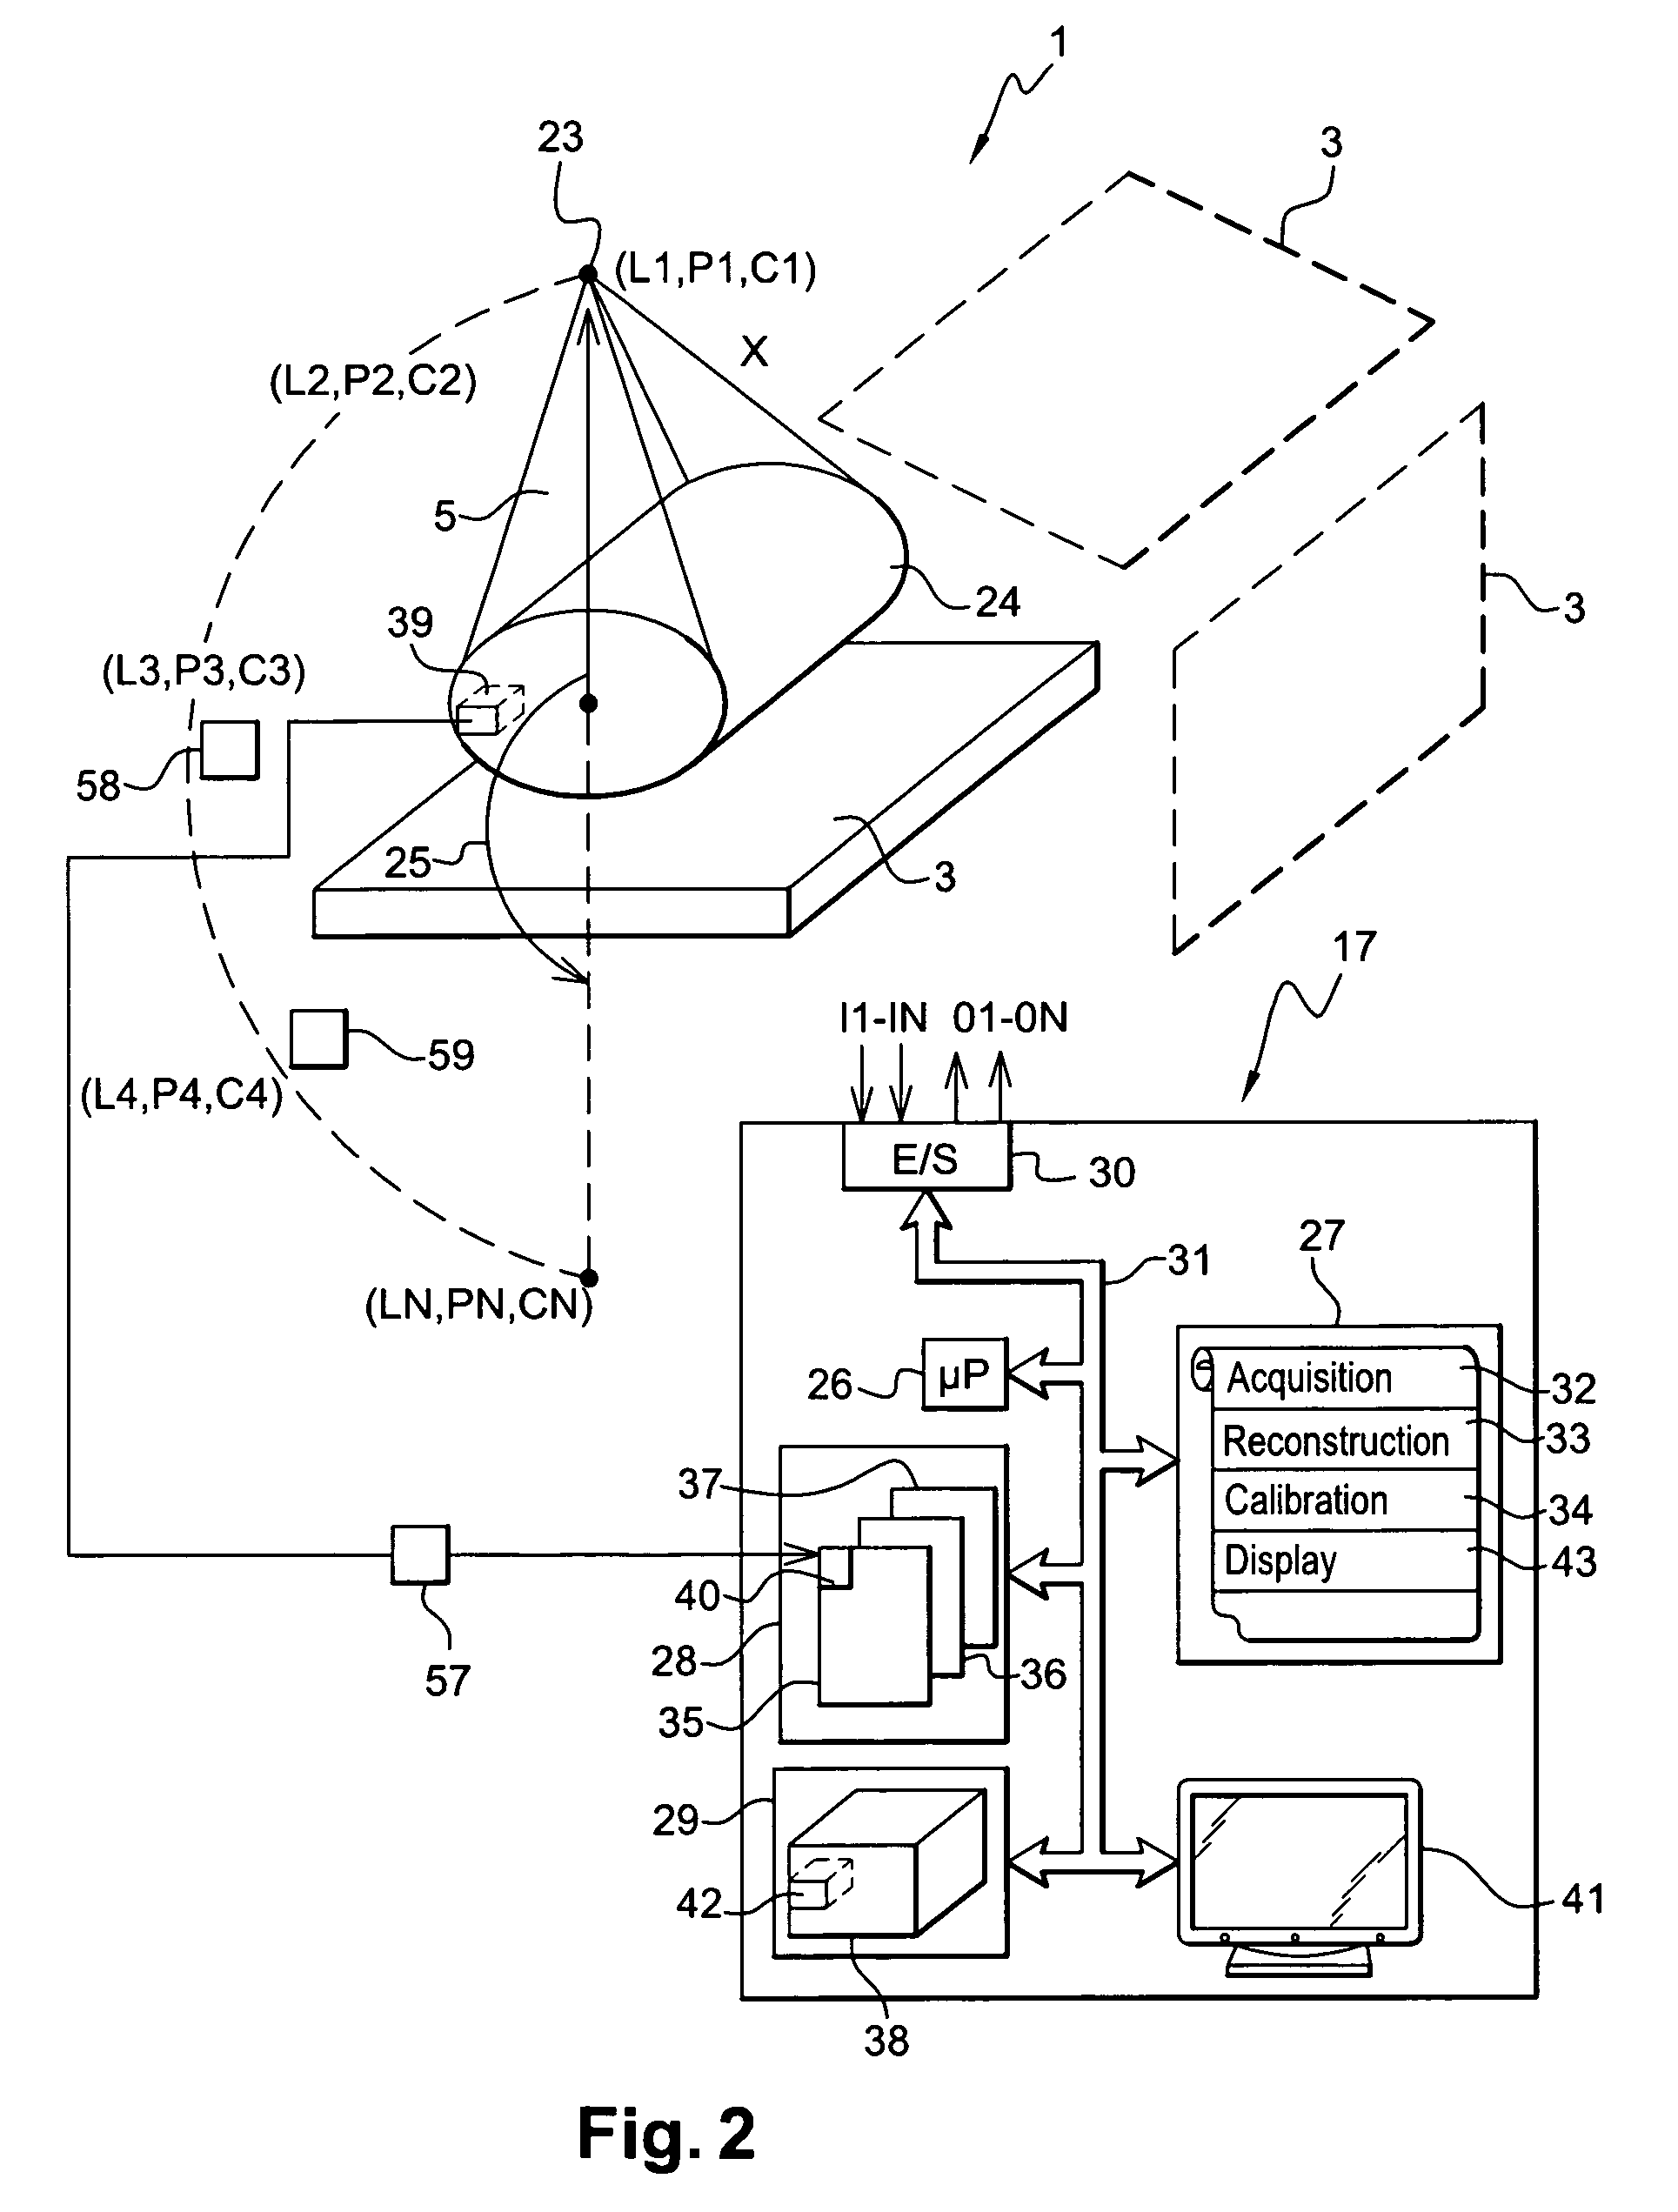 Method for acquisition geometry of an imaging system